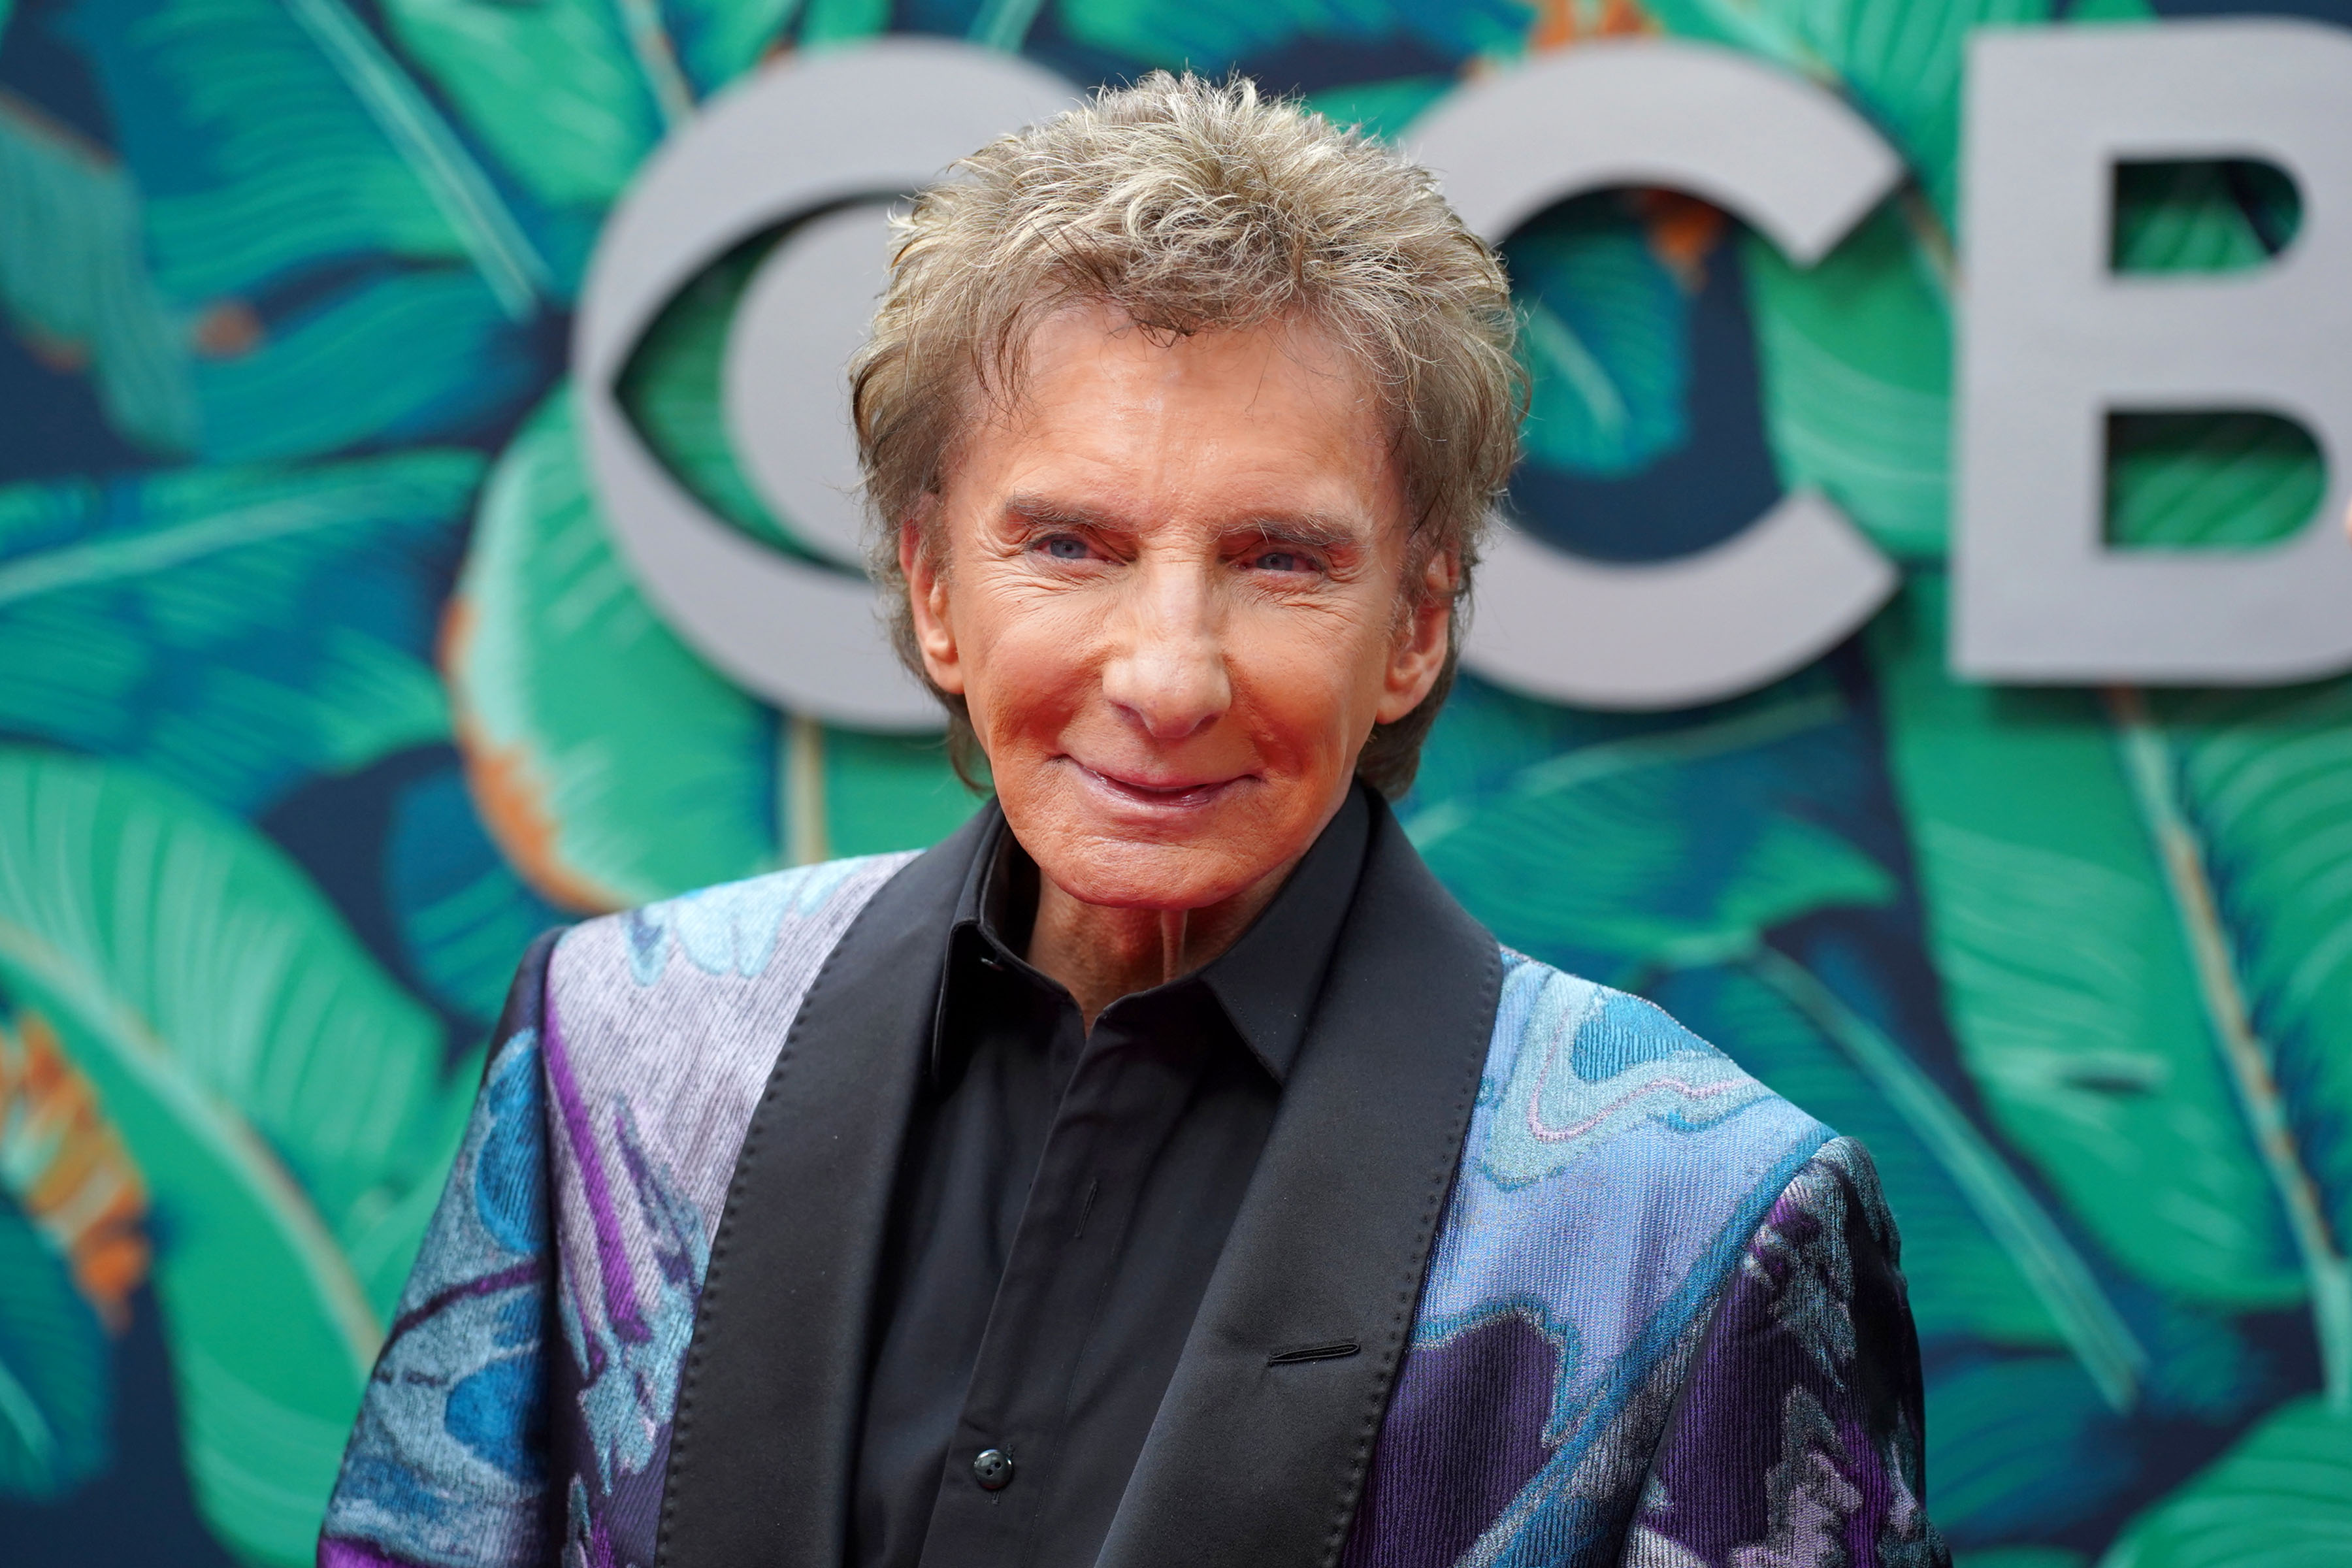 Barry Manilow’s history writing jingles for major brands before his big